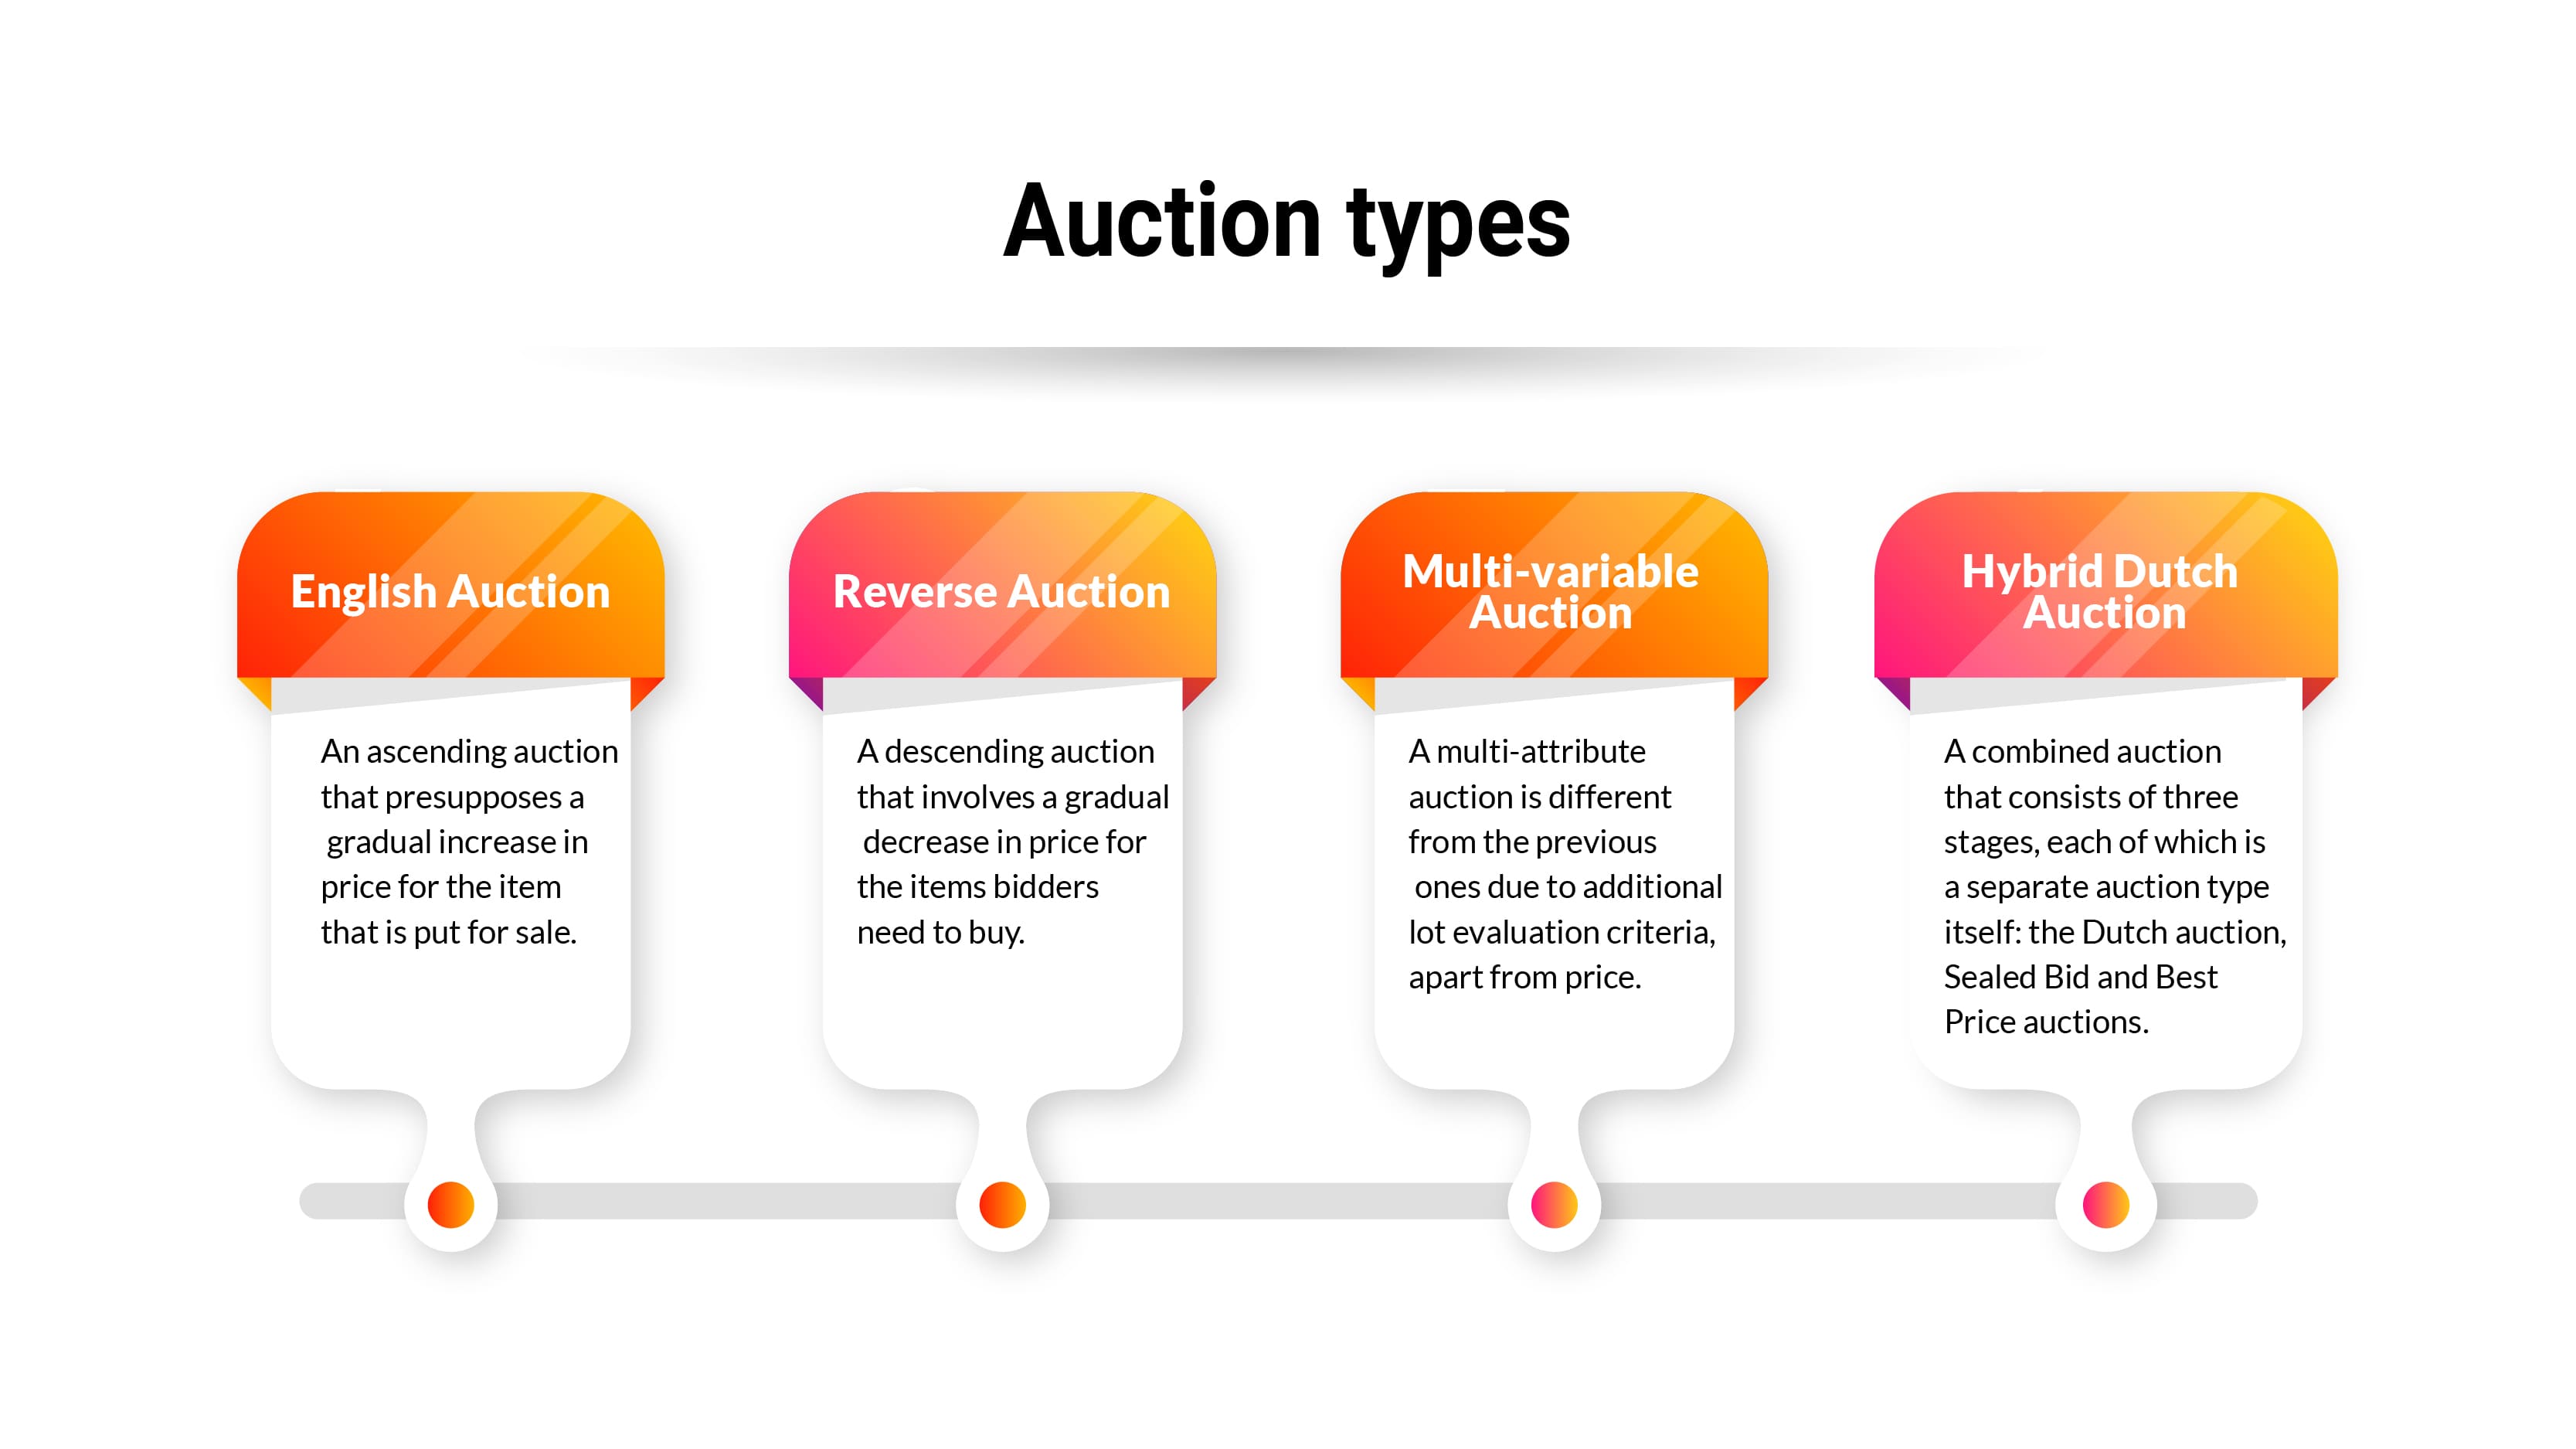 Auction types. English Auction.  An ascending auction that presupposes a gradual increase in price for the item that is put for sale. Reverse Auction. A descending auction that involves a gradual decrease in price for the items bidders need to buy. Multi-variable Auction. A multi-attribute auction is different from the previous ones due to additional lot evaluation criteria, apart from price. Hybrid Dutch Auction. A combined auction that consists of three stages, each of which is a separate auction type itself: the Dutch auction, Sealed Bid and Best Price auctions.